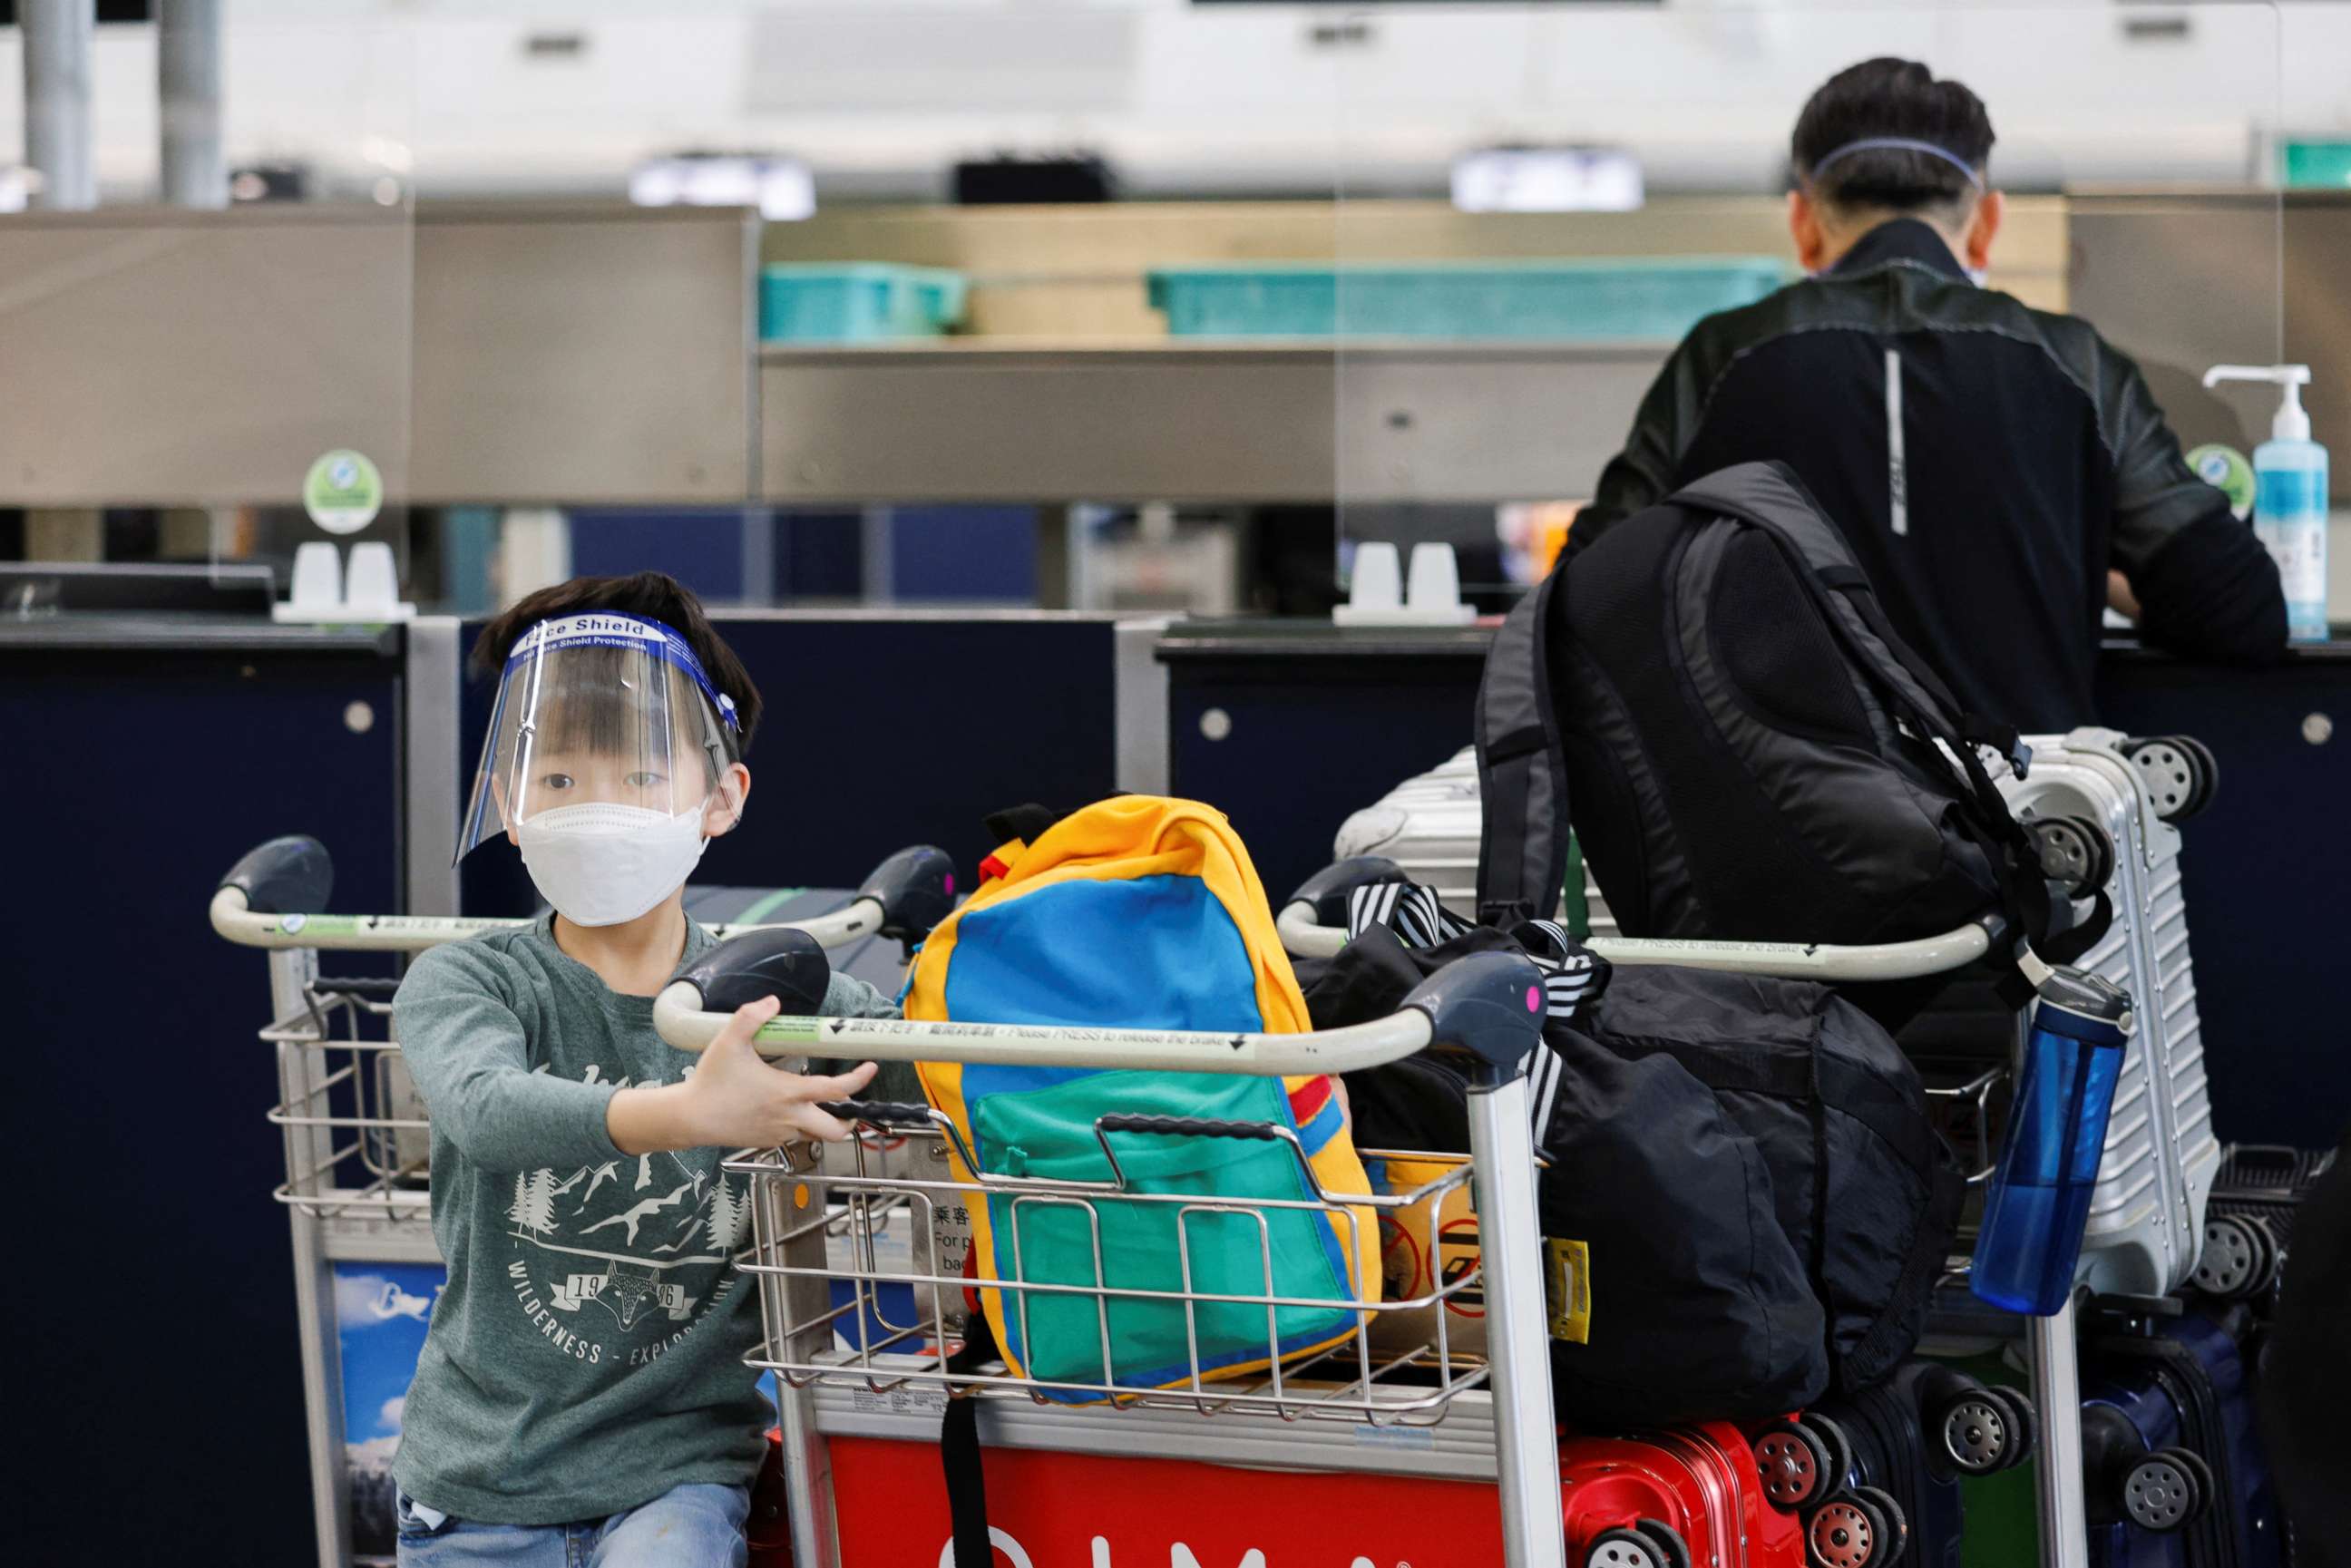 PHOTO: A child wearing a face mask looks on at the check-in counters of the Hong Kong International Airport amid the COVID-19 pandemic in Hong Kong, China, March 21, 2022.